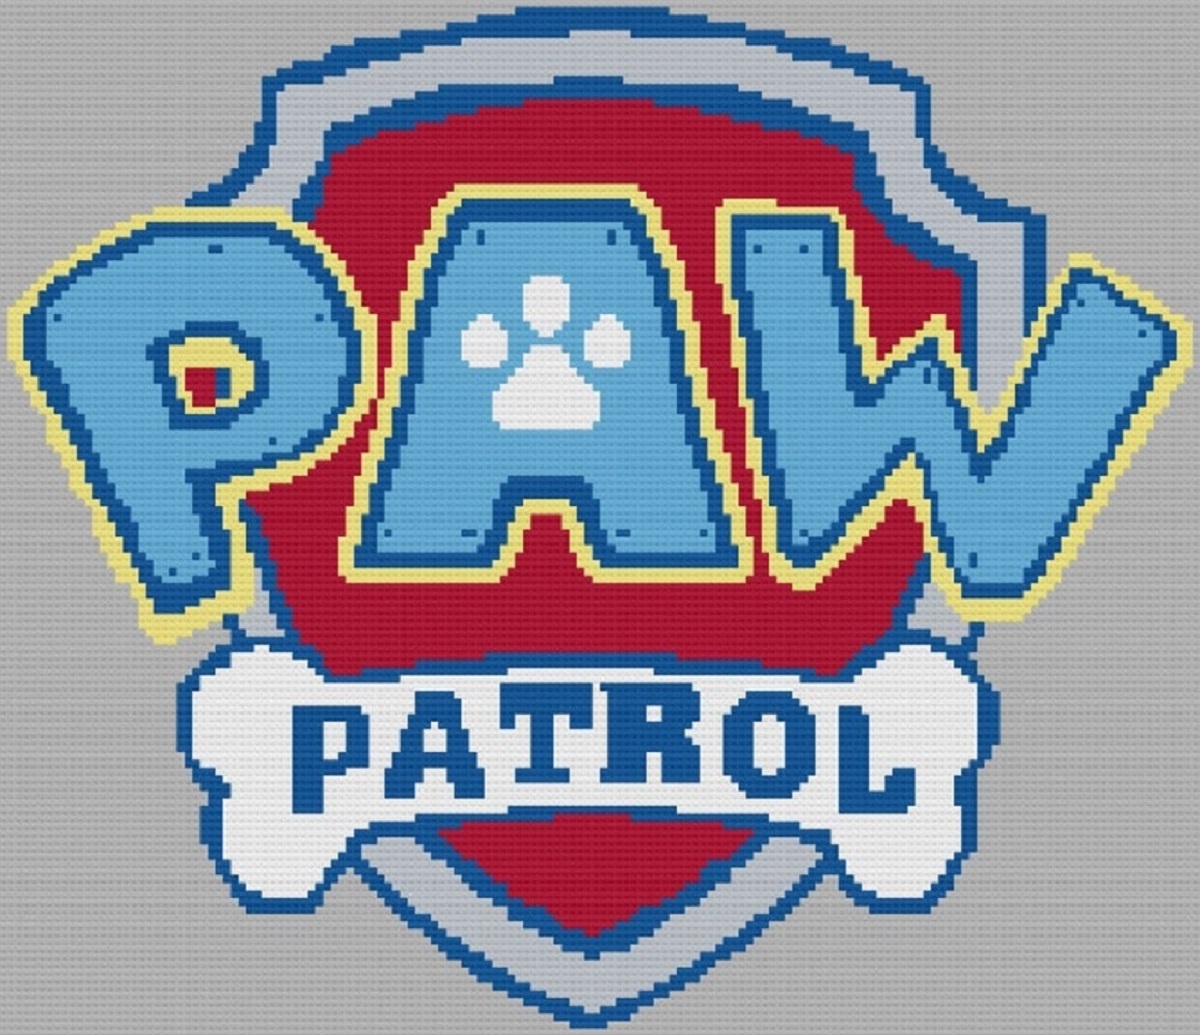  Large crochet Paw Patrol logo with blue stitching for the writing and a red, blue, and white shield in the background.